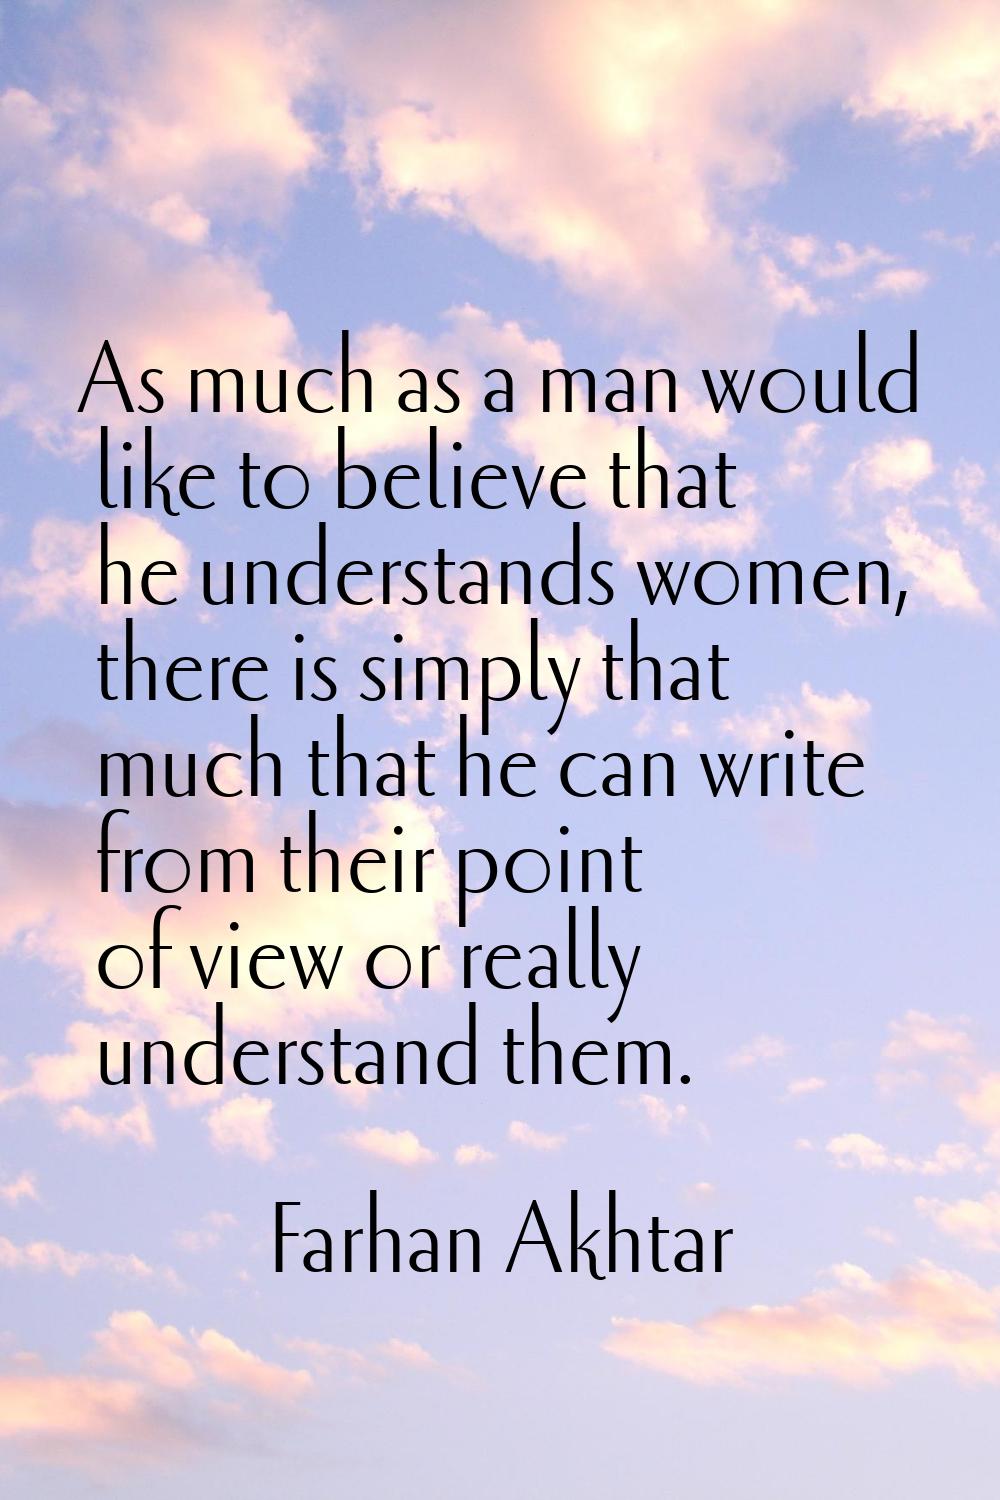 As much as a man would like to believe that he understands women, there is simply that much that he